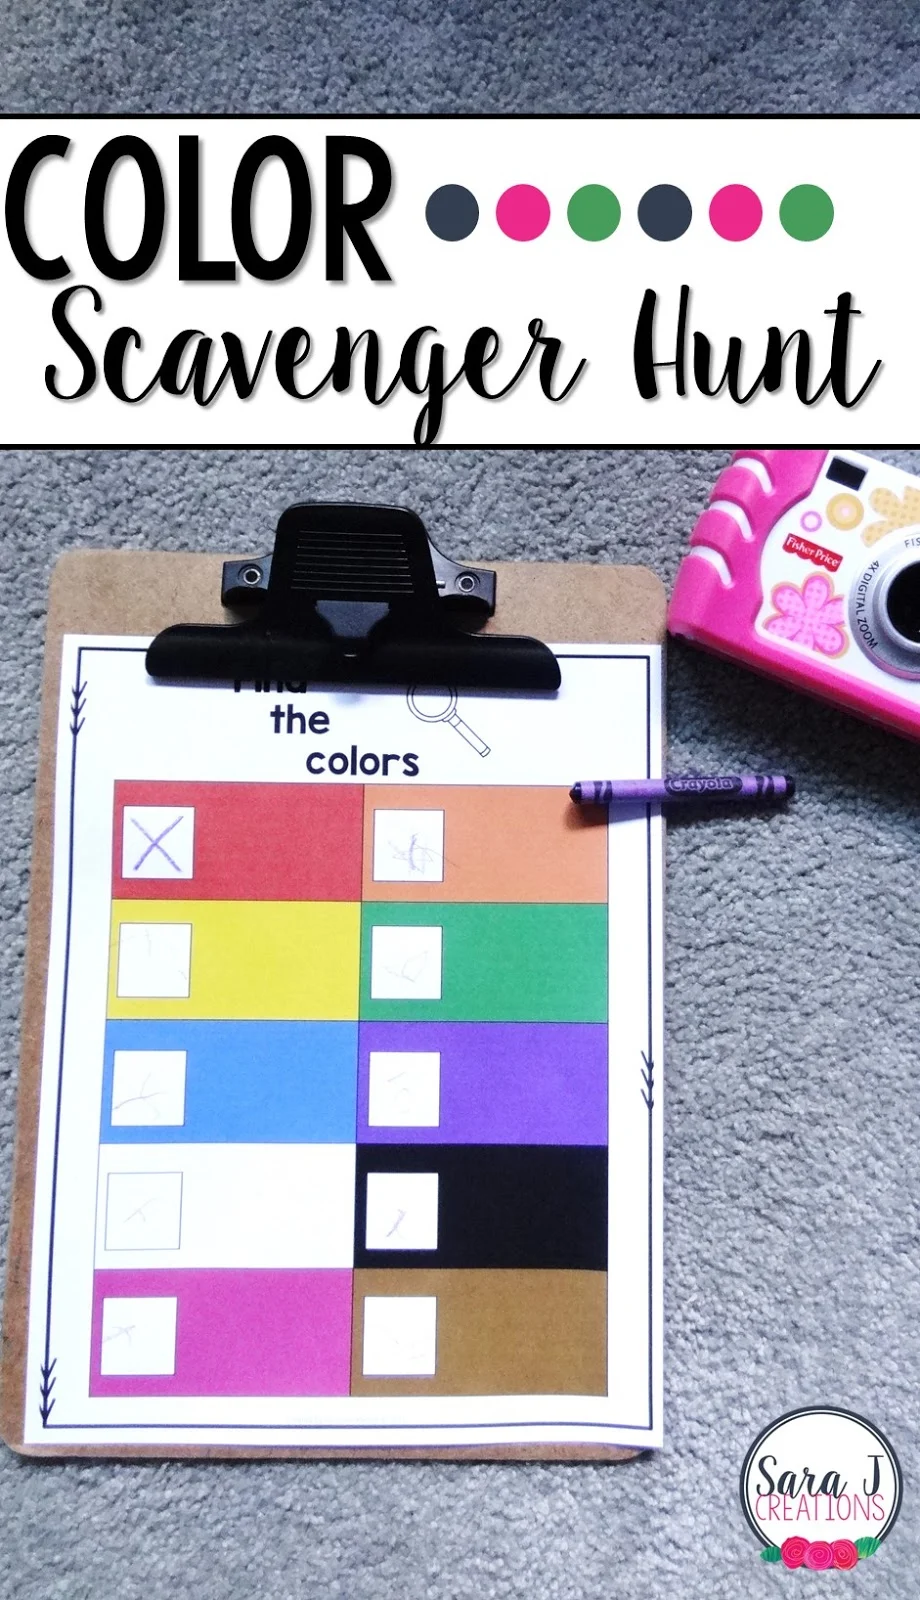 Reviewing colors?  Try a color scavenger hunt around your house, school or neighborhood.  So fun for kids!